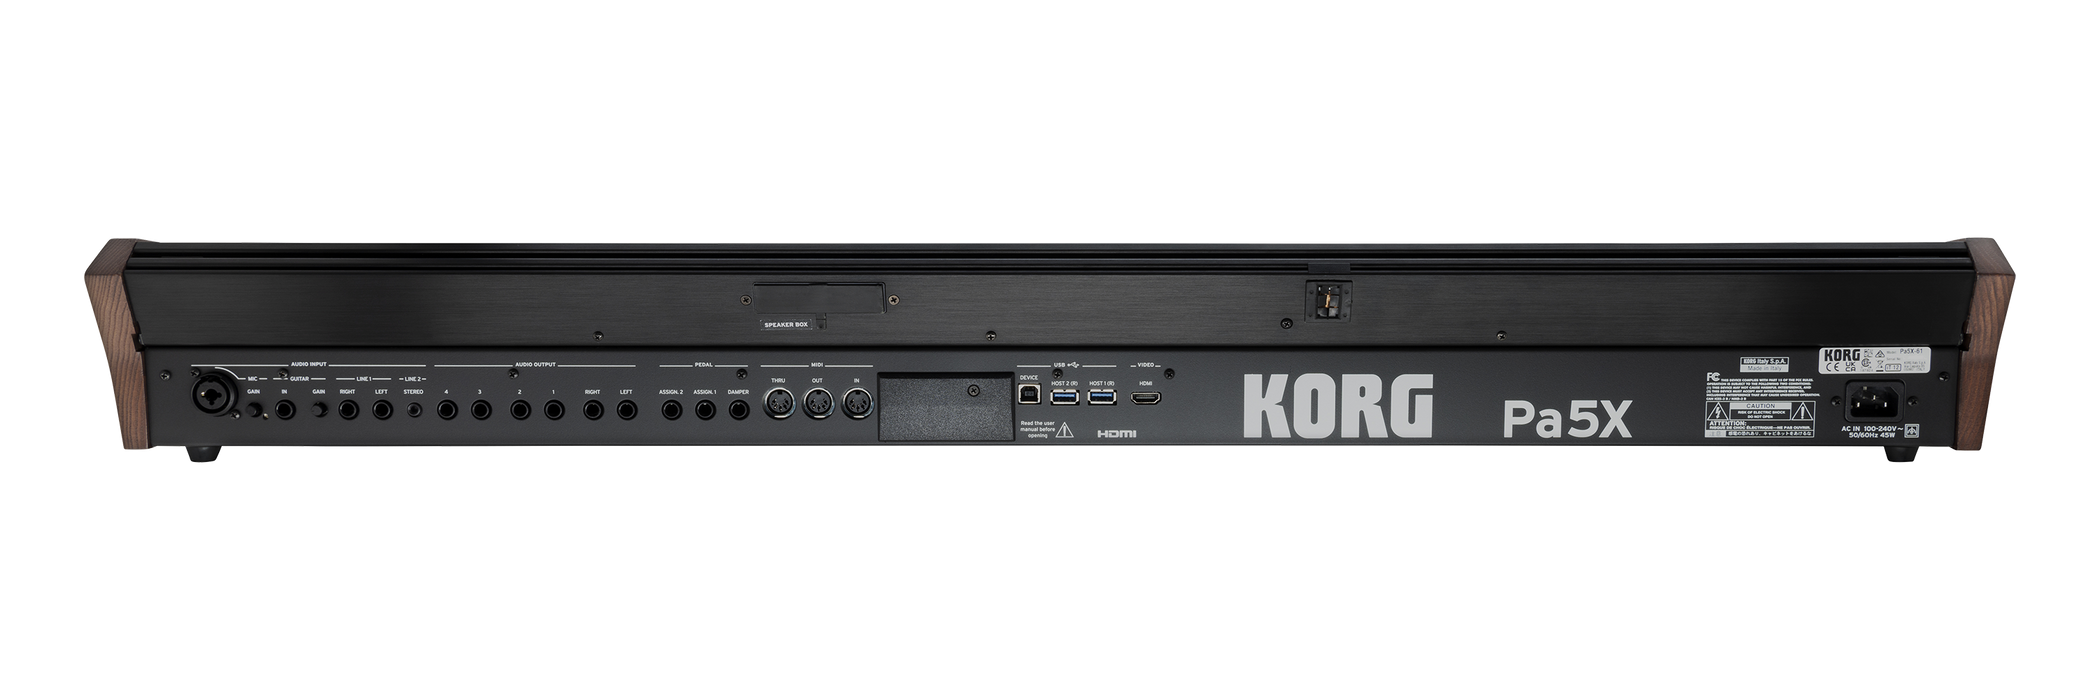 Korg - PA5X61 - 61 semi weighted RX arranger